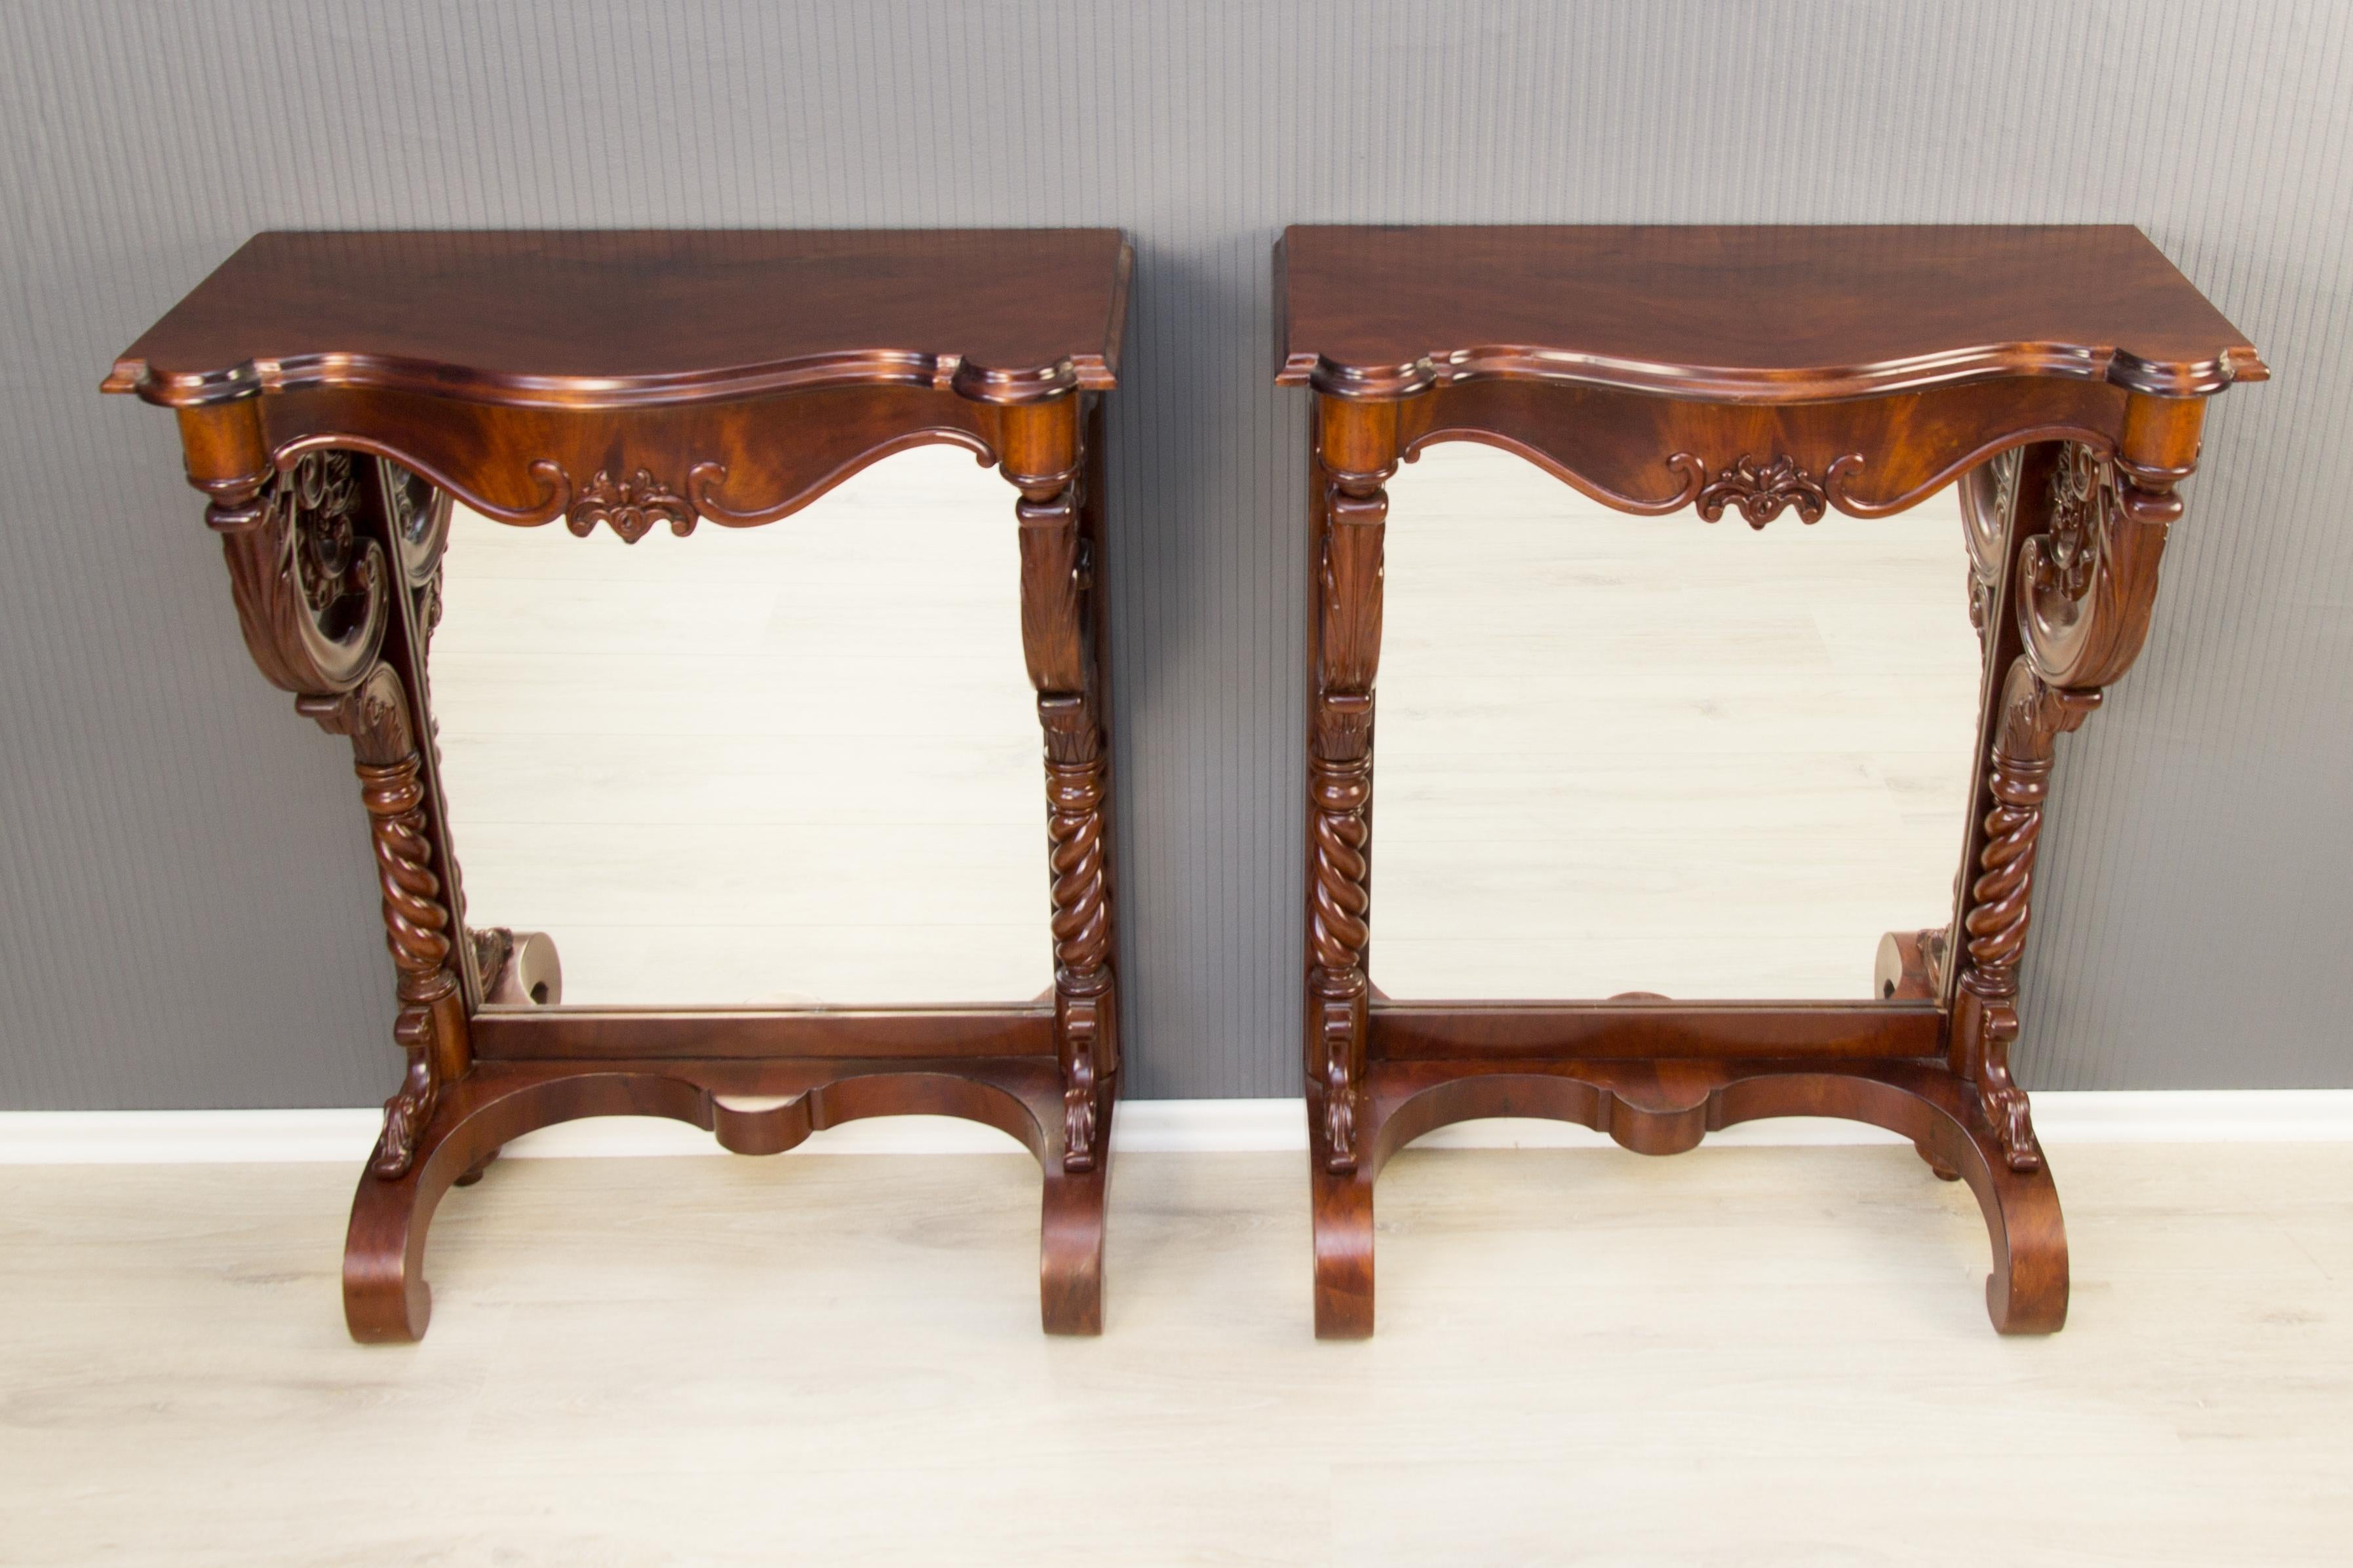 Pair of Regency style walnut wall console tables from circa 1860 France are raised on carved scrolling supports with mirrored back panels. The legs and front of the consoles are decorated with carved floral and acanthus leaf motifs.
The mirror backs